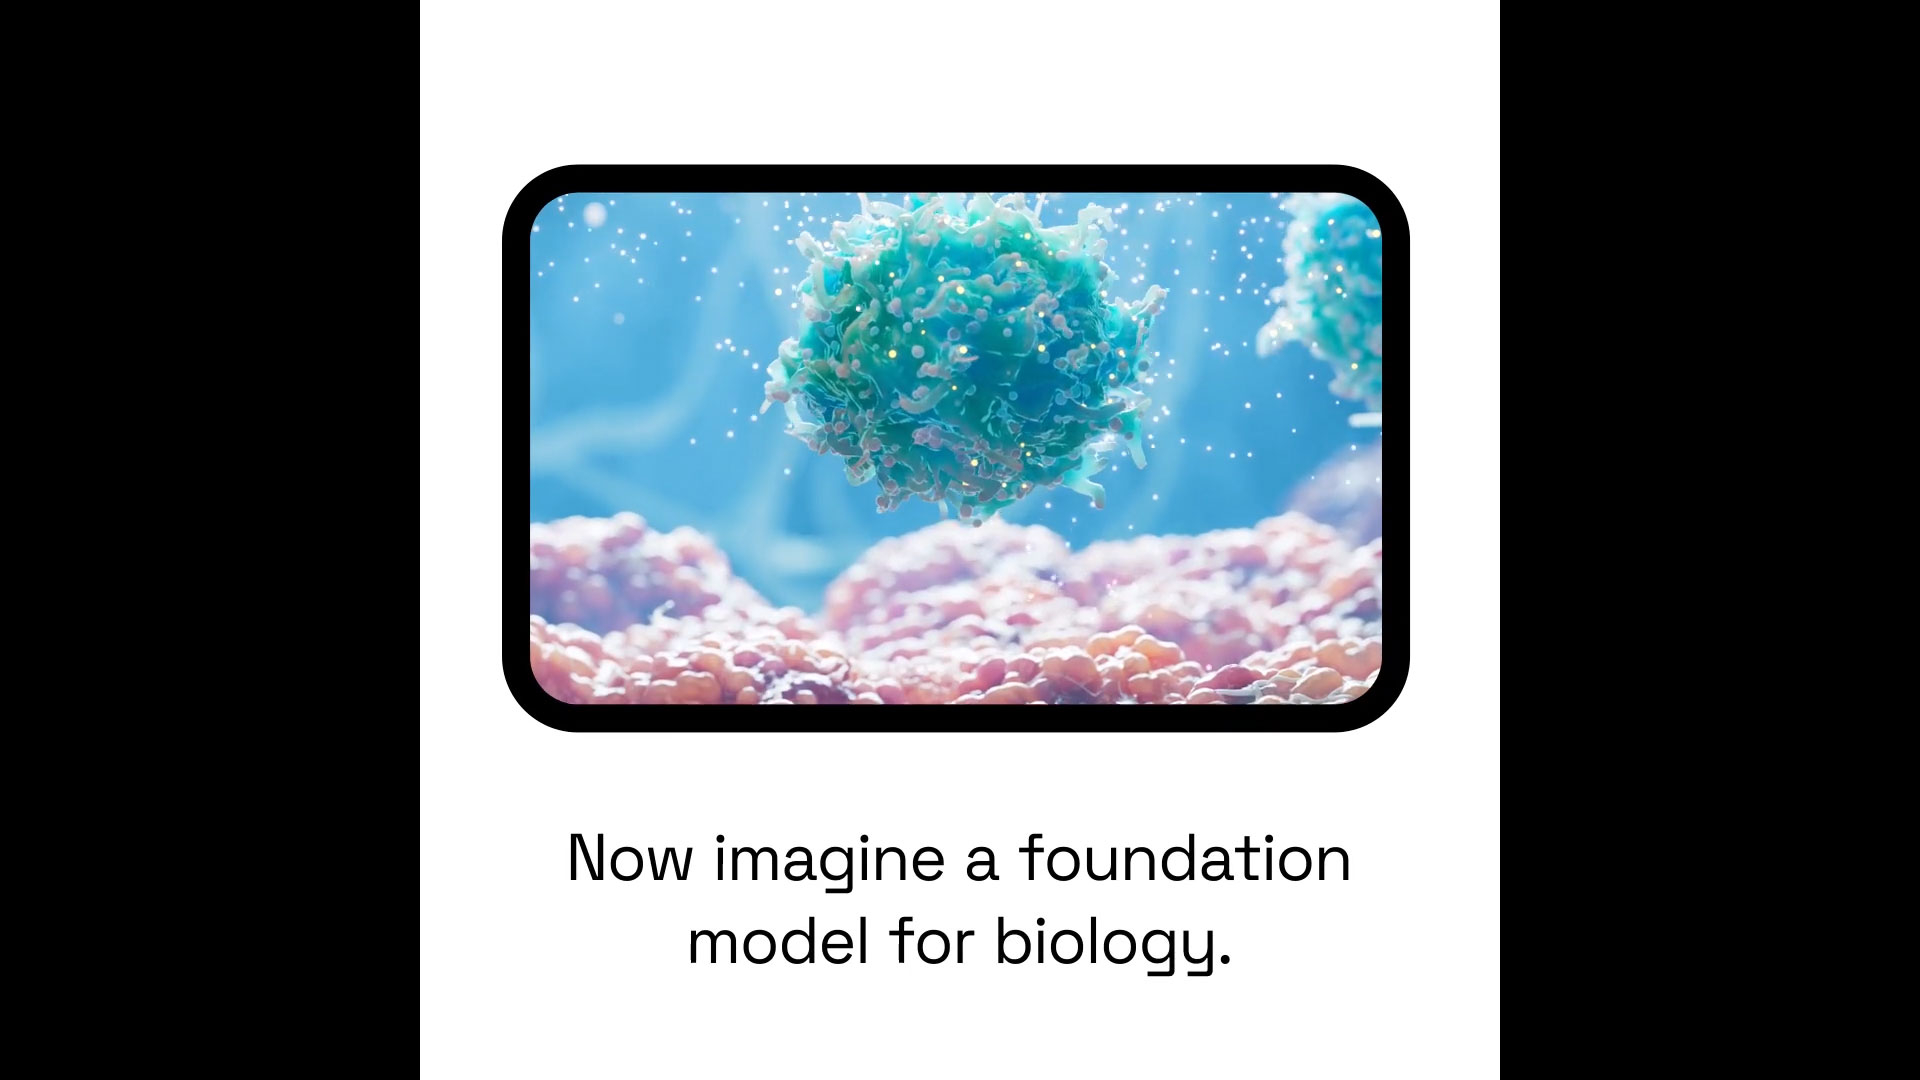 Bioptimus is on a mission to build the first universal AI foundation model for biology to fuel breakthrough discoveries and accelerate innovations in biomedicine and beyond.